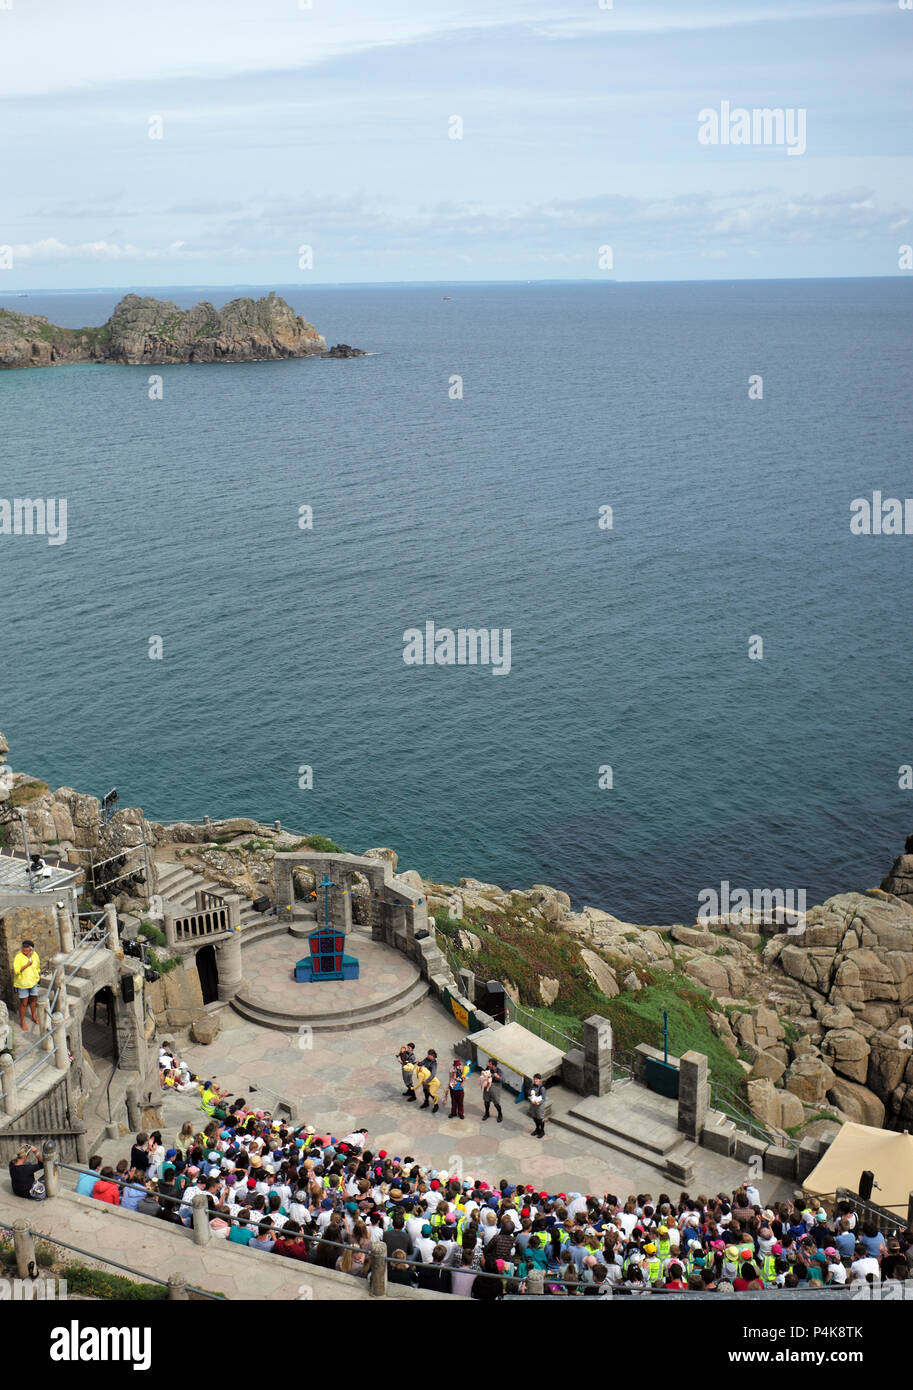 Members of the audience watch a performance at the Minack Theatre, in Porthcurno, near Land's End in Cornwall, Britain June 13, 2018 Stock Photo